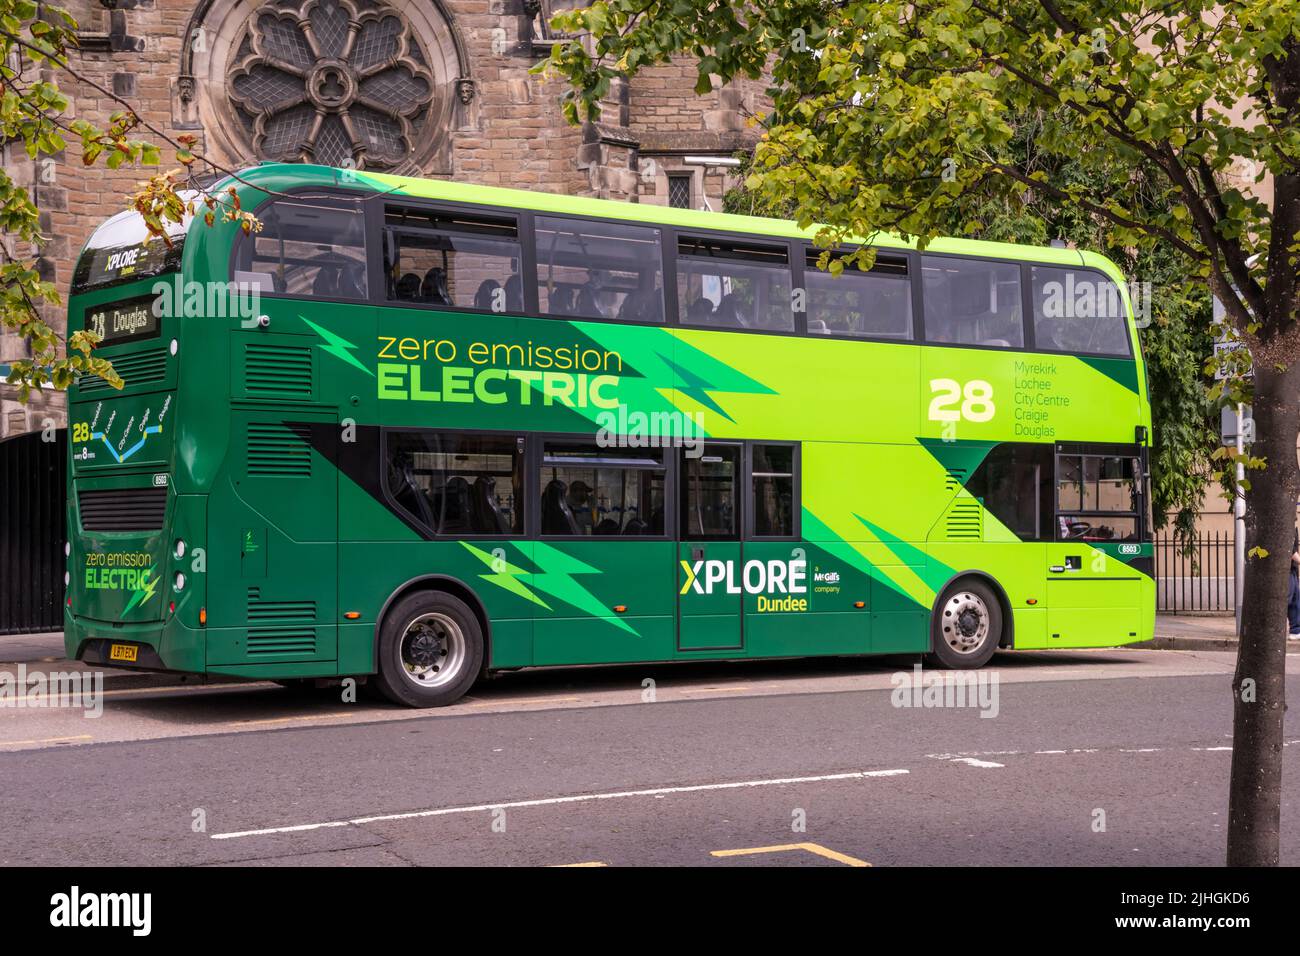 A zero emission electric bus in Dundee, Scotland. Stock Photo